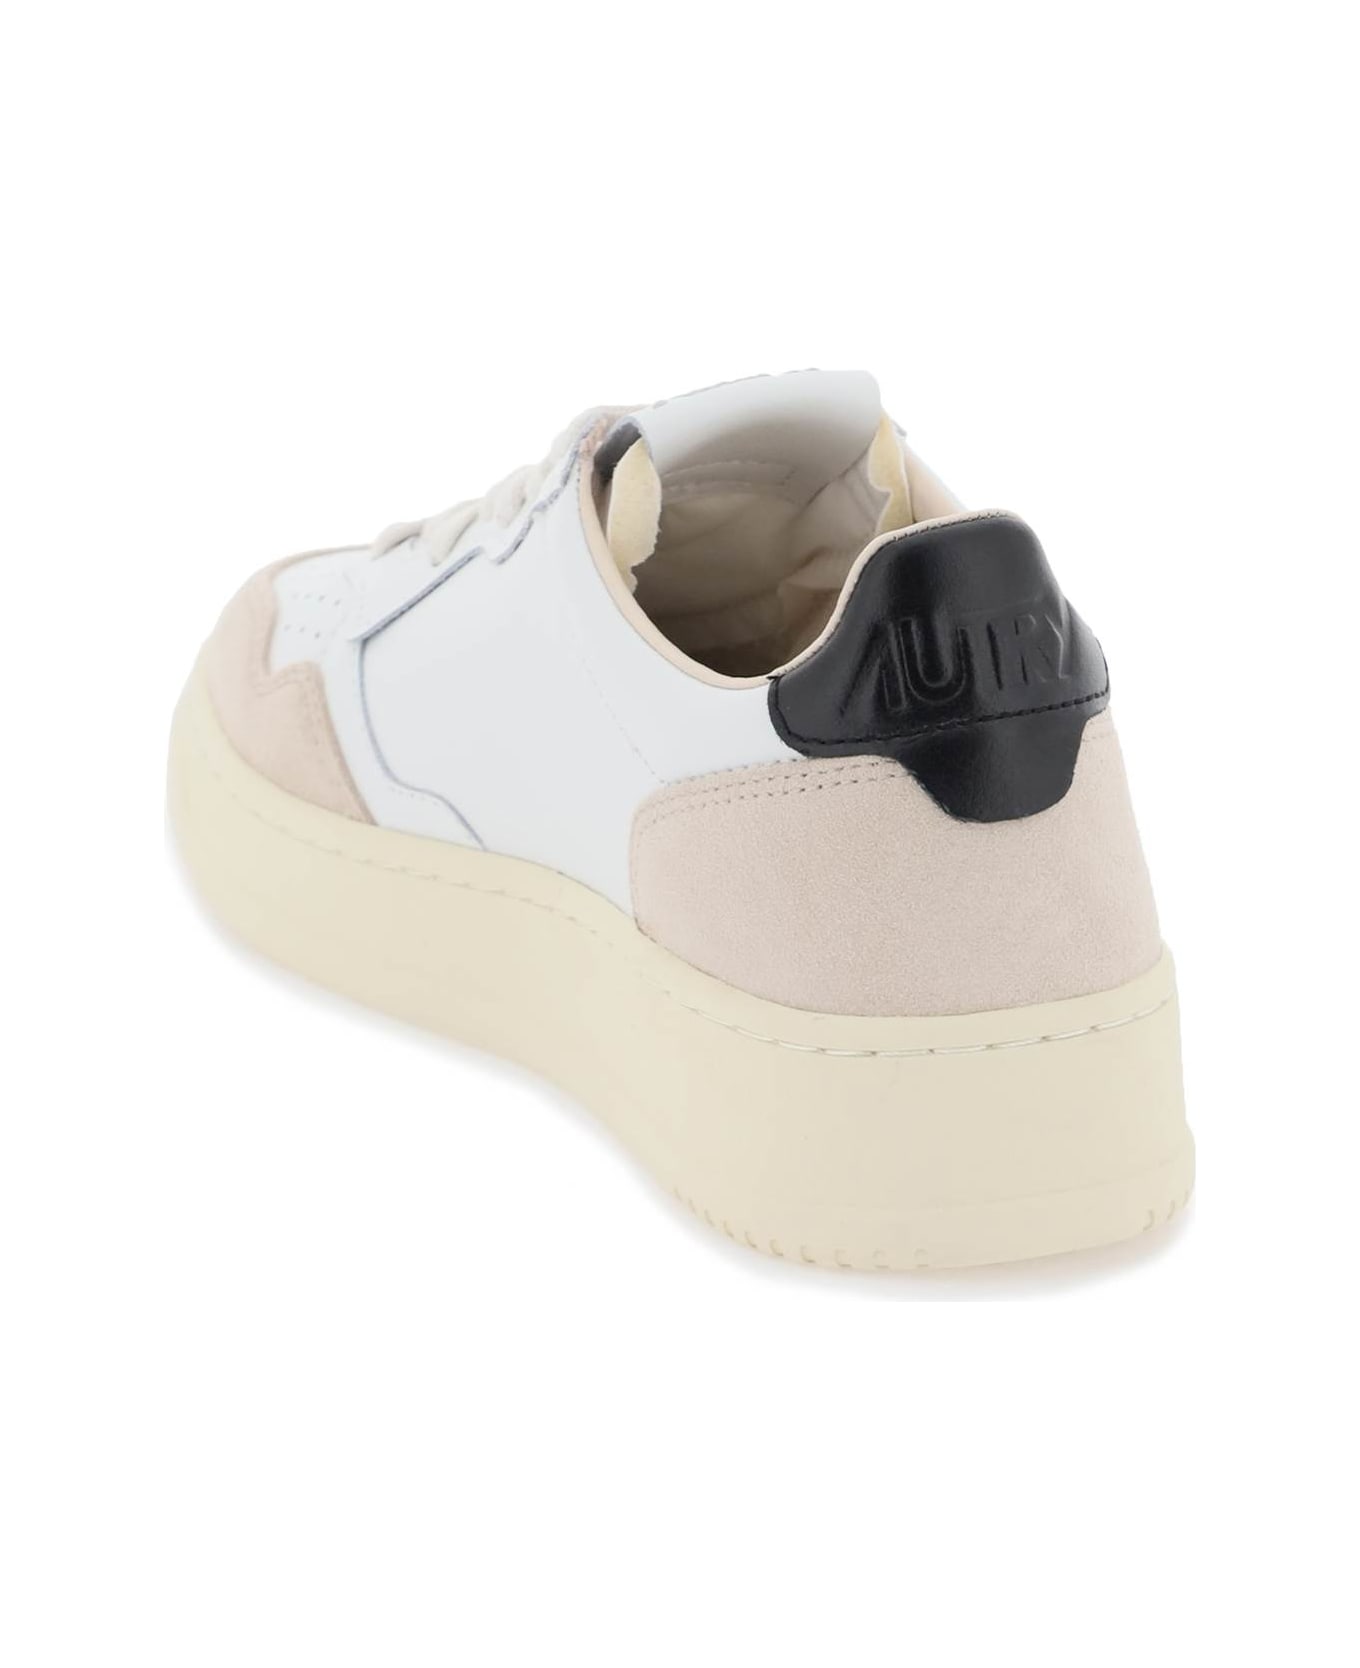 Autry Medalist Low Sneakers - White/Black